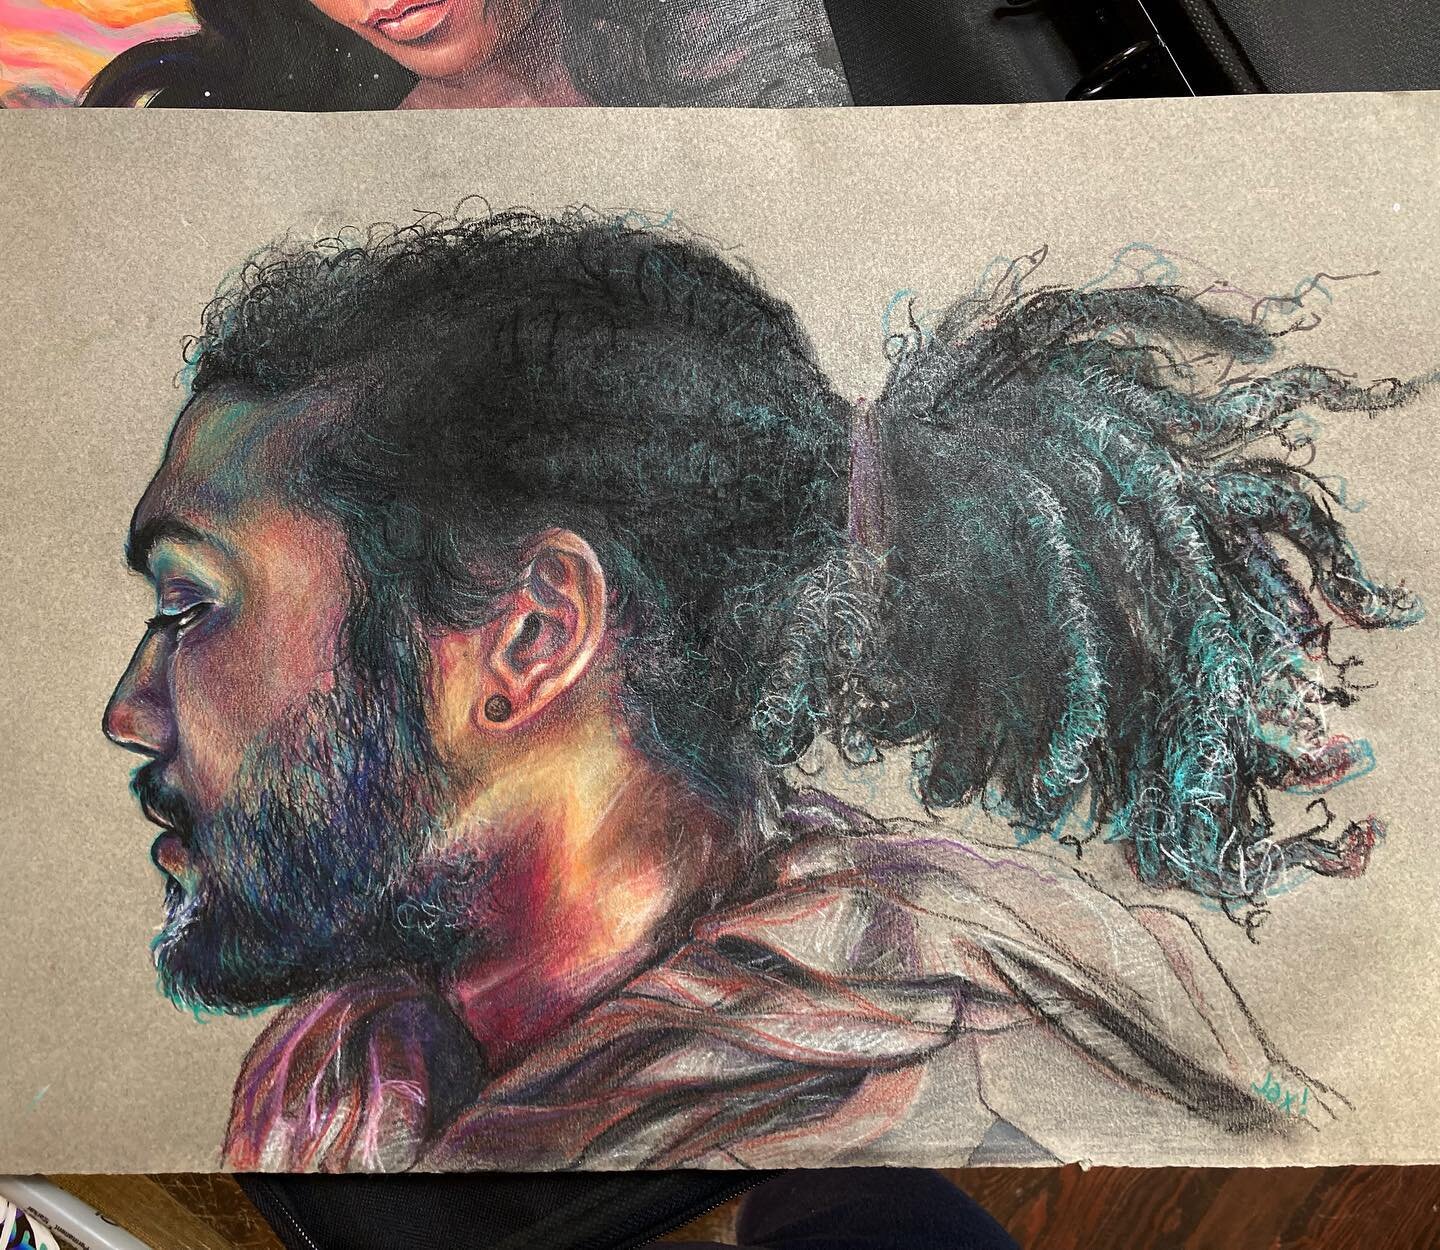 An olddddd colored pencil/chalk pastel back from the mid 2000s when I used to make my classmates let me draw them, like the super talented @aort1982 
.
.
.
.
.
.
.
#portraitart #rainbowportrait #prismacolors #chalkpastels #traditionalartwork